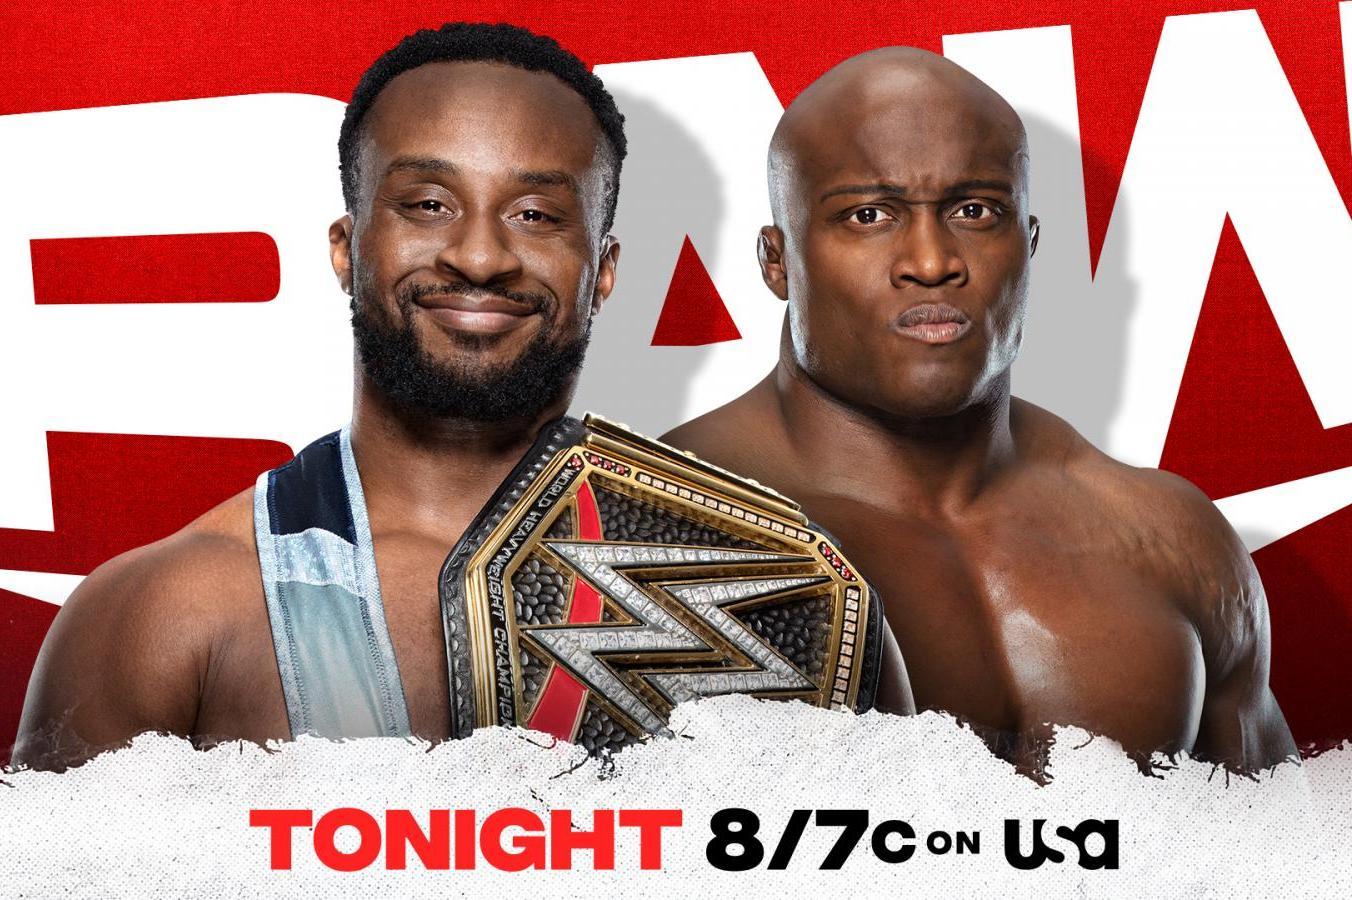 Wwe Raw Results Winners Grades Reaction And Highlights From September 27 Bleacher Report Latest News Videos And Highlights